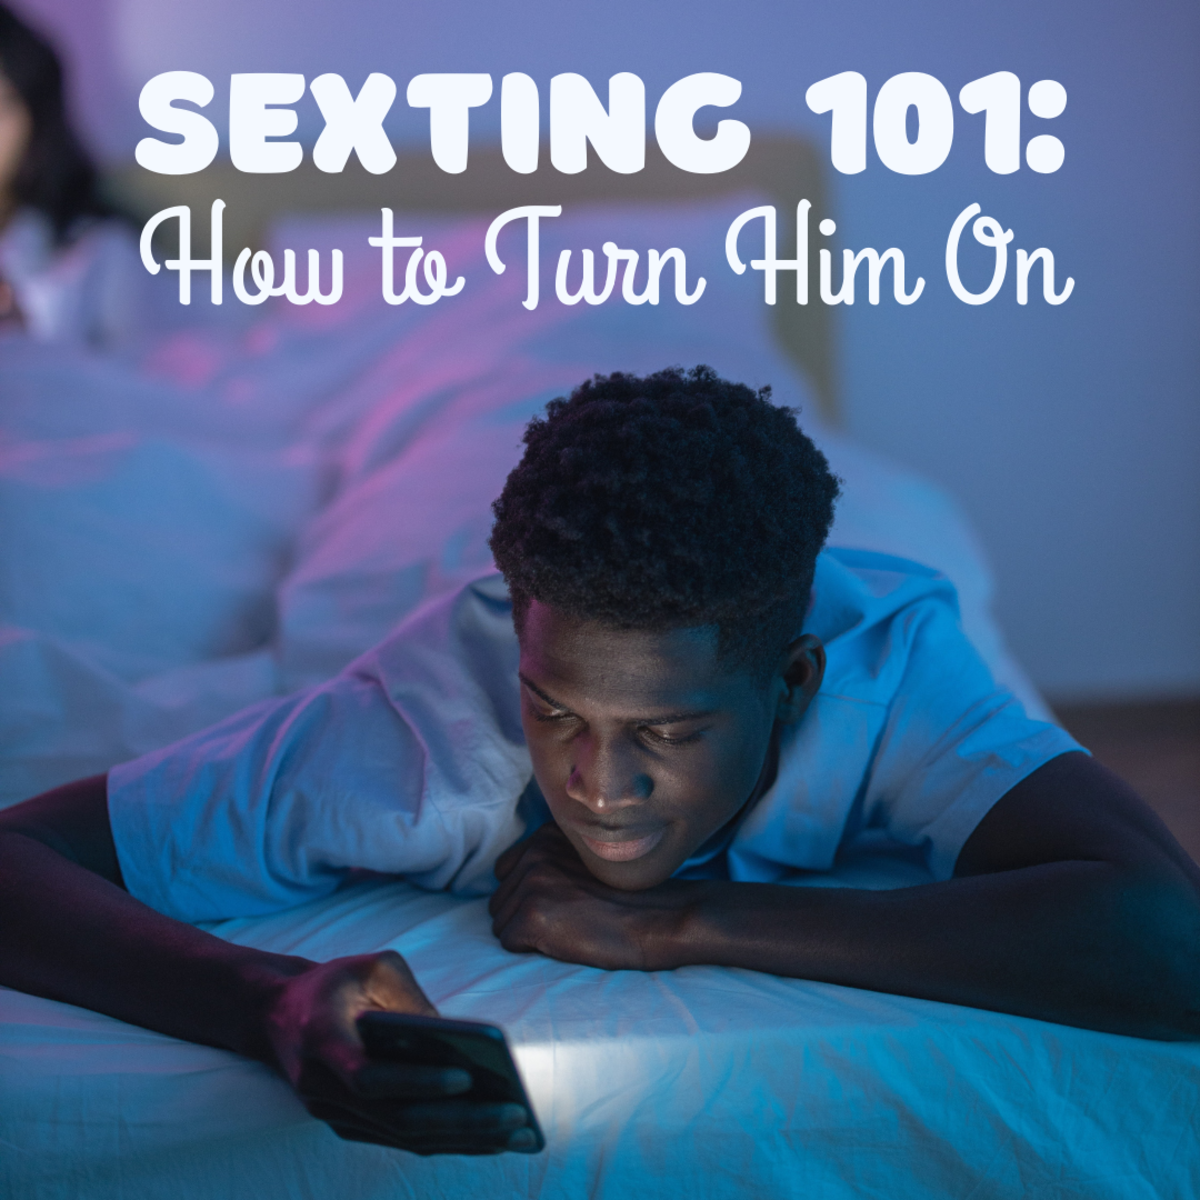 Sexting examples passionate 45+ Sexting